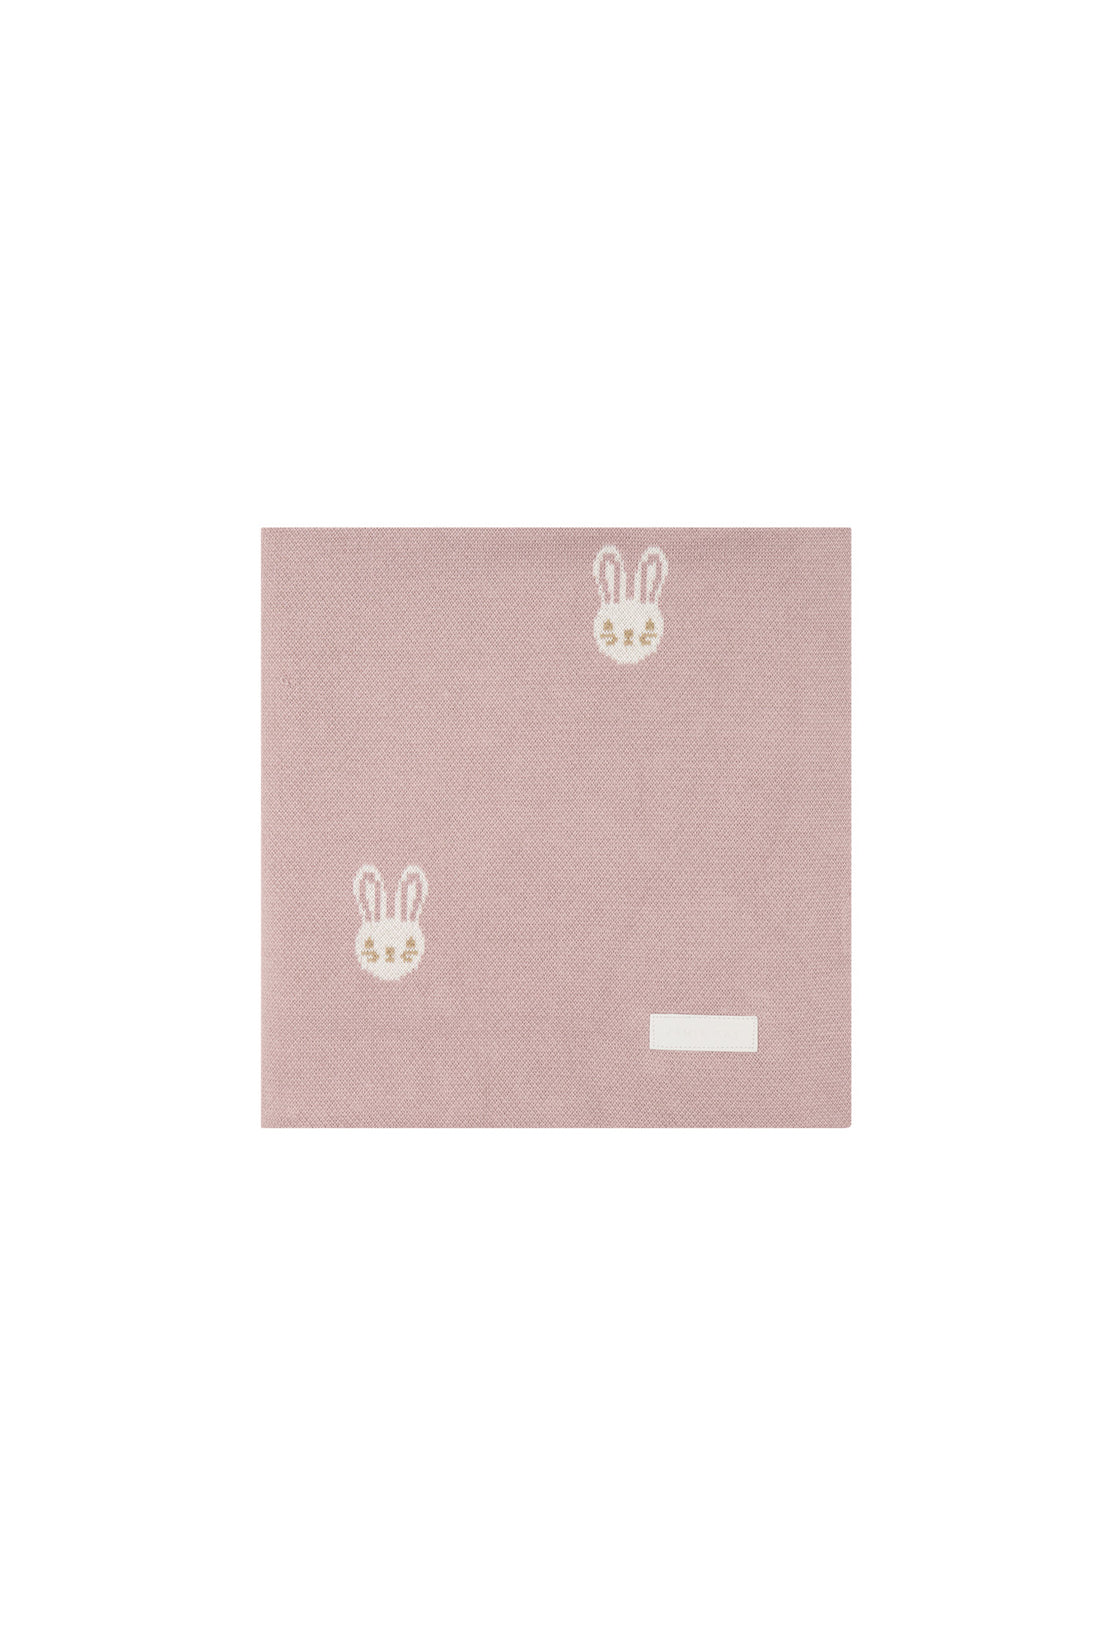 Bunny Knitted Blanket - Powder Pink Childrens Blanket from Jamie Kay NZ